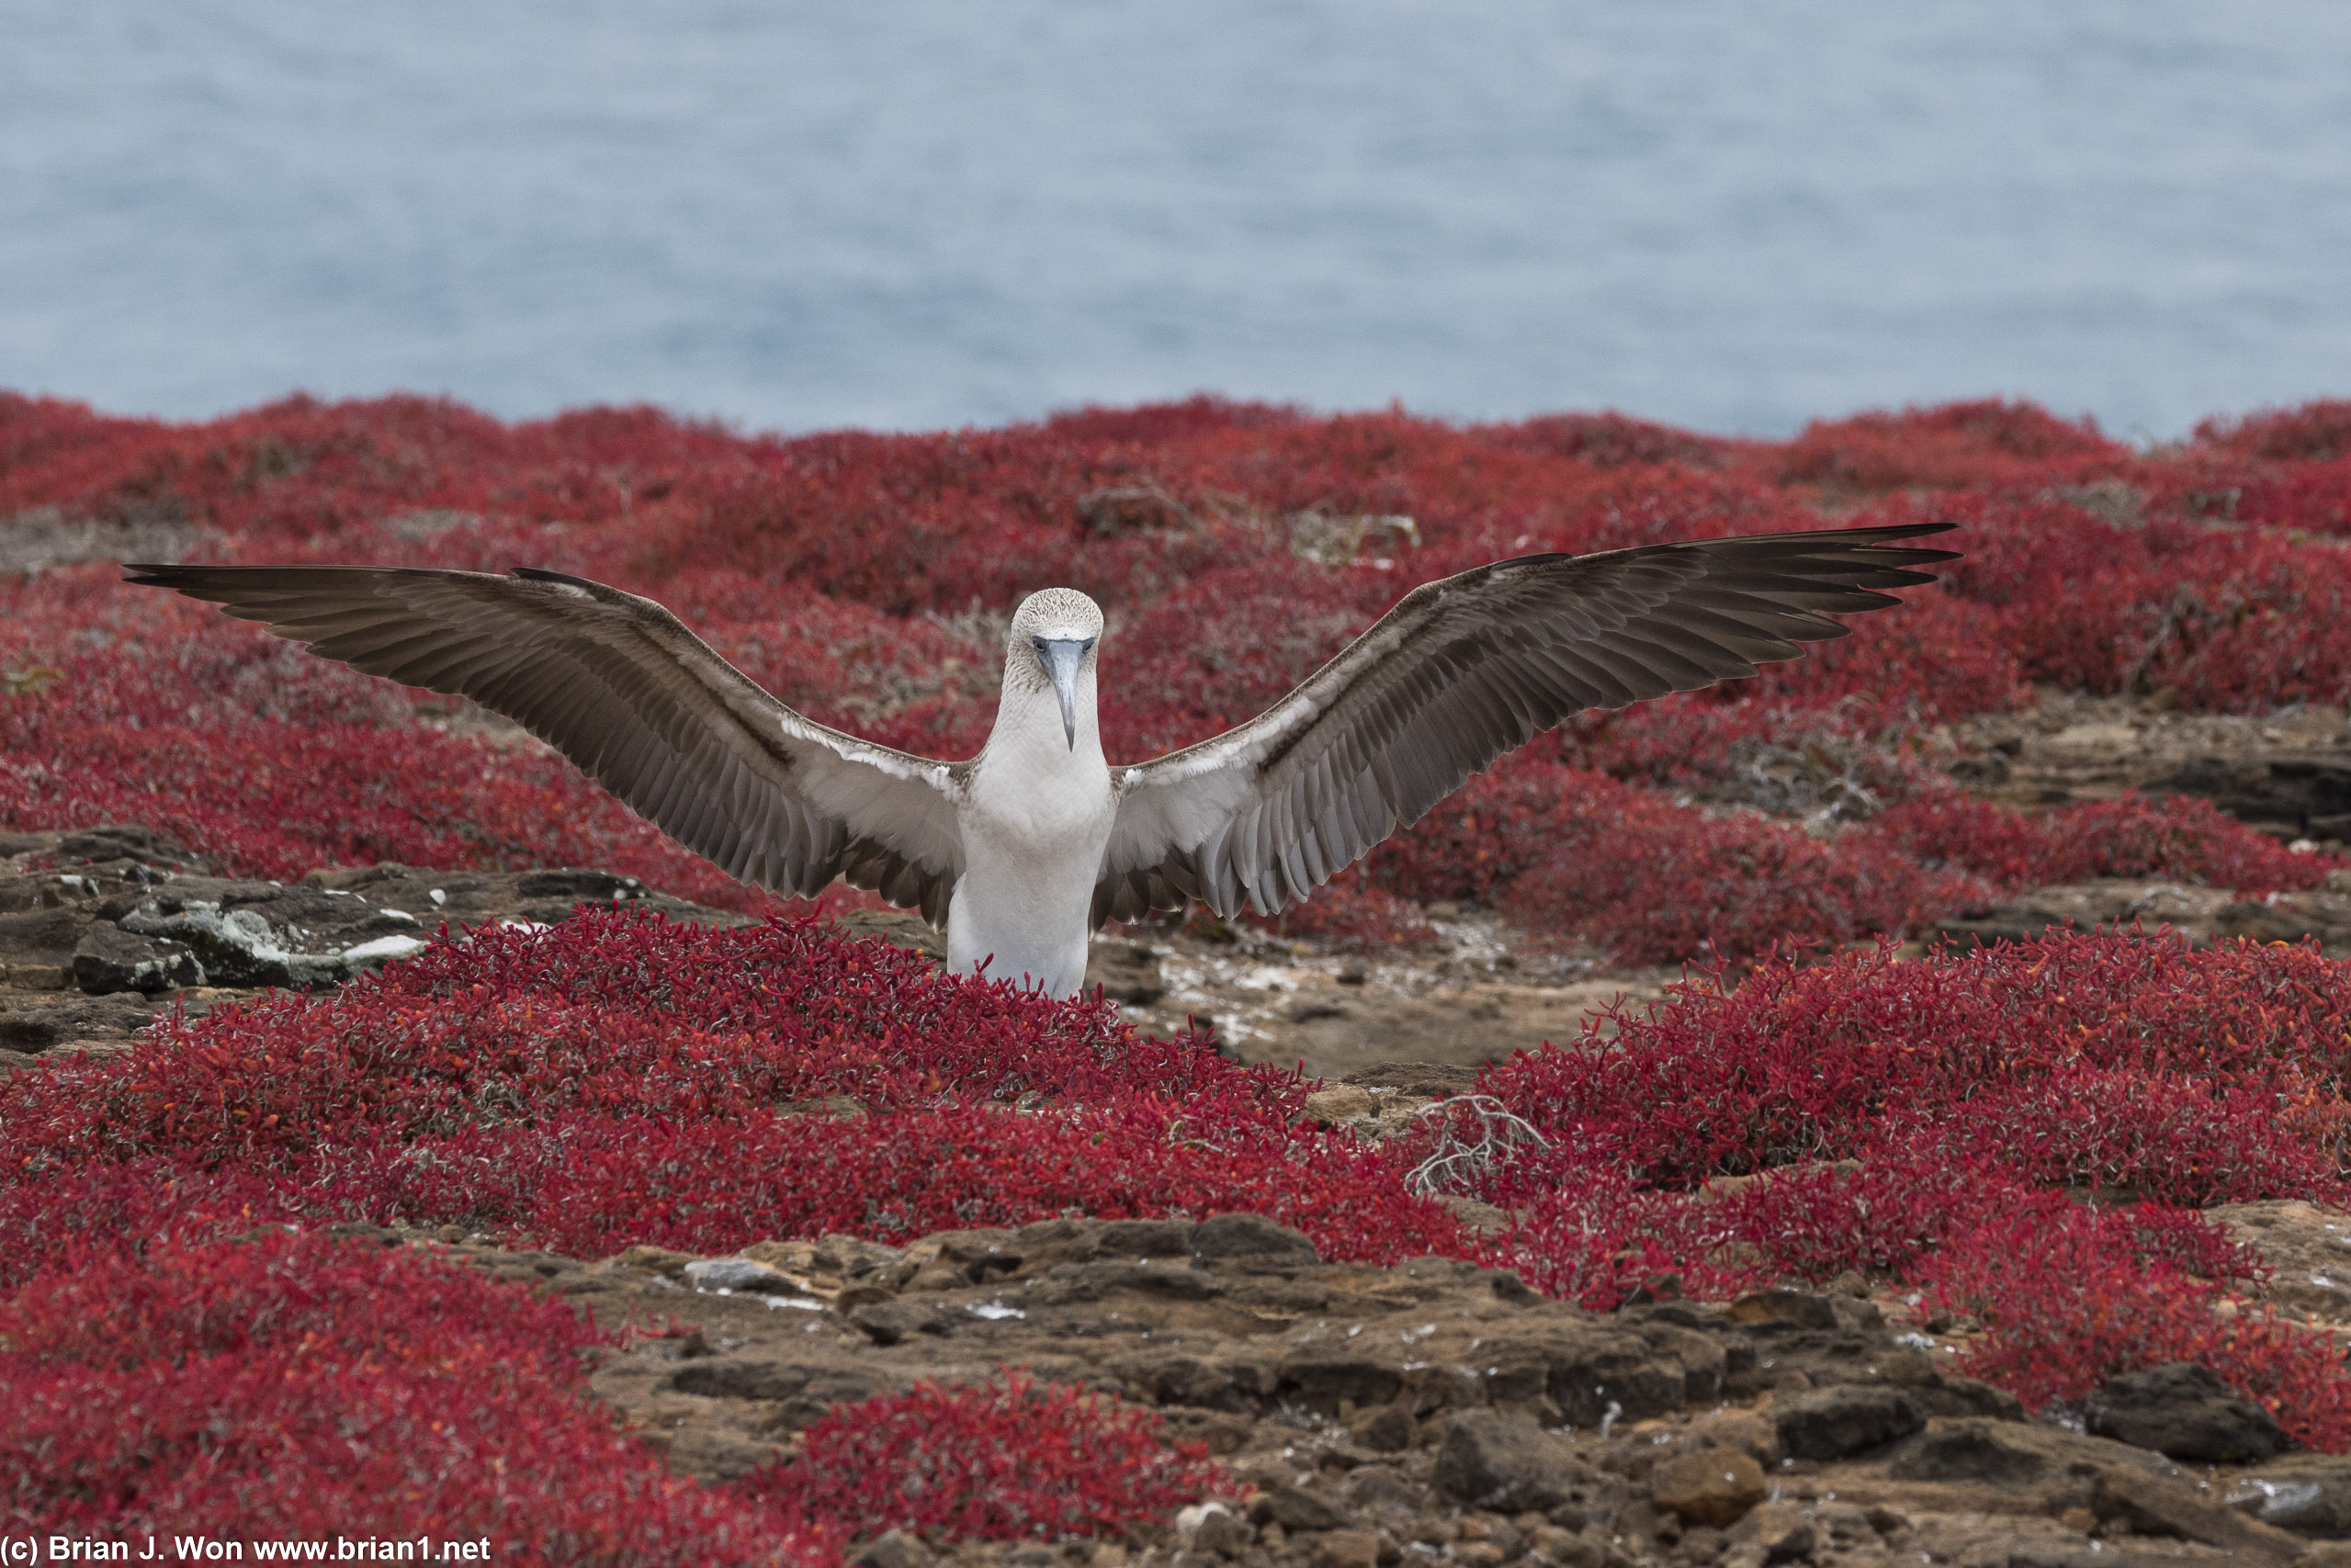 Blue-footed booby stretching her/his wings.